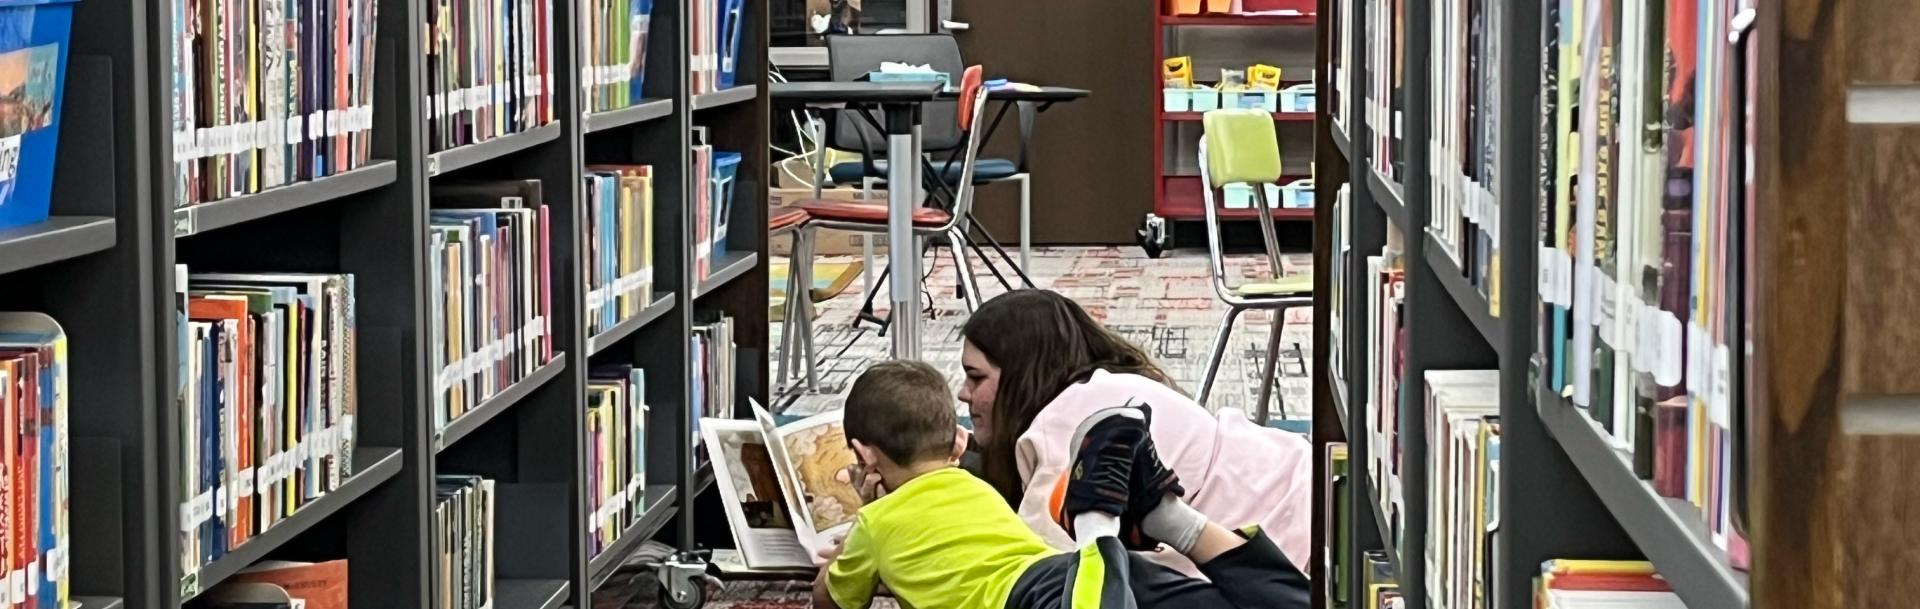 CK Gifford Park volunteer reading with student.